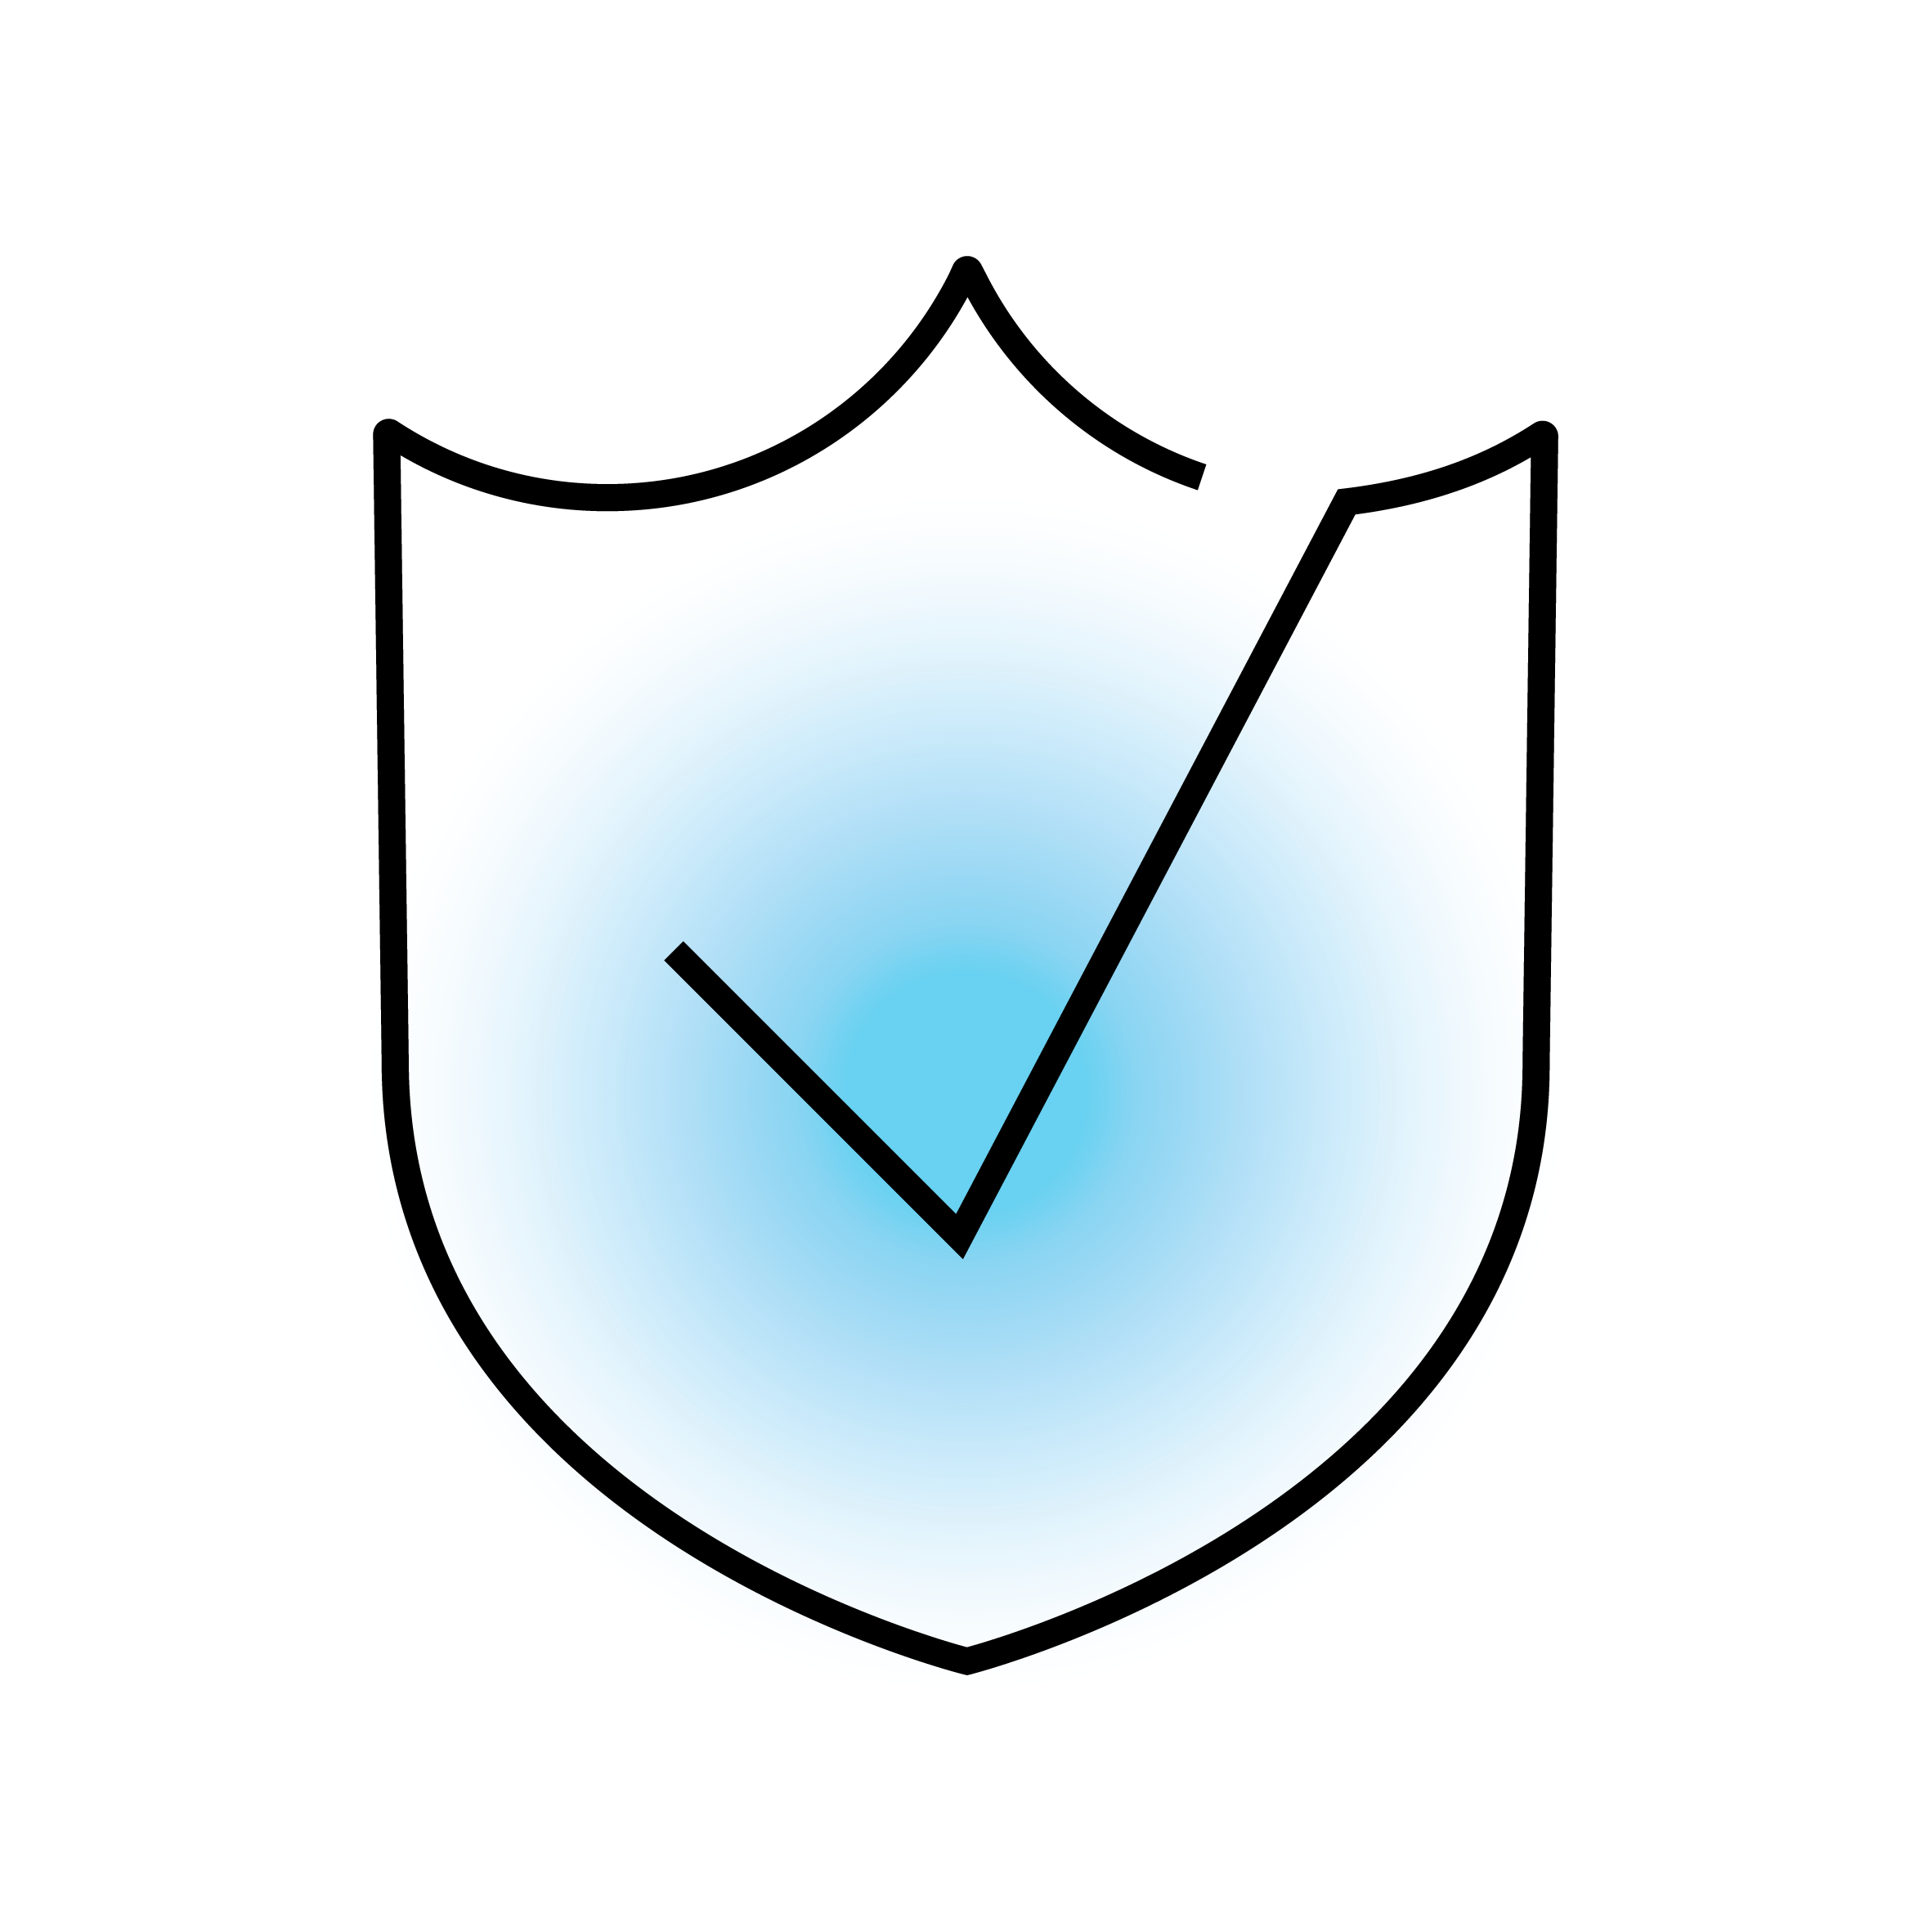 Shield symbol with blue background and tick to indicate safety or protection.